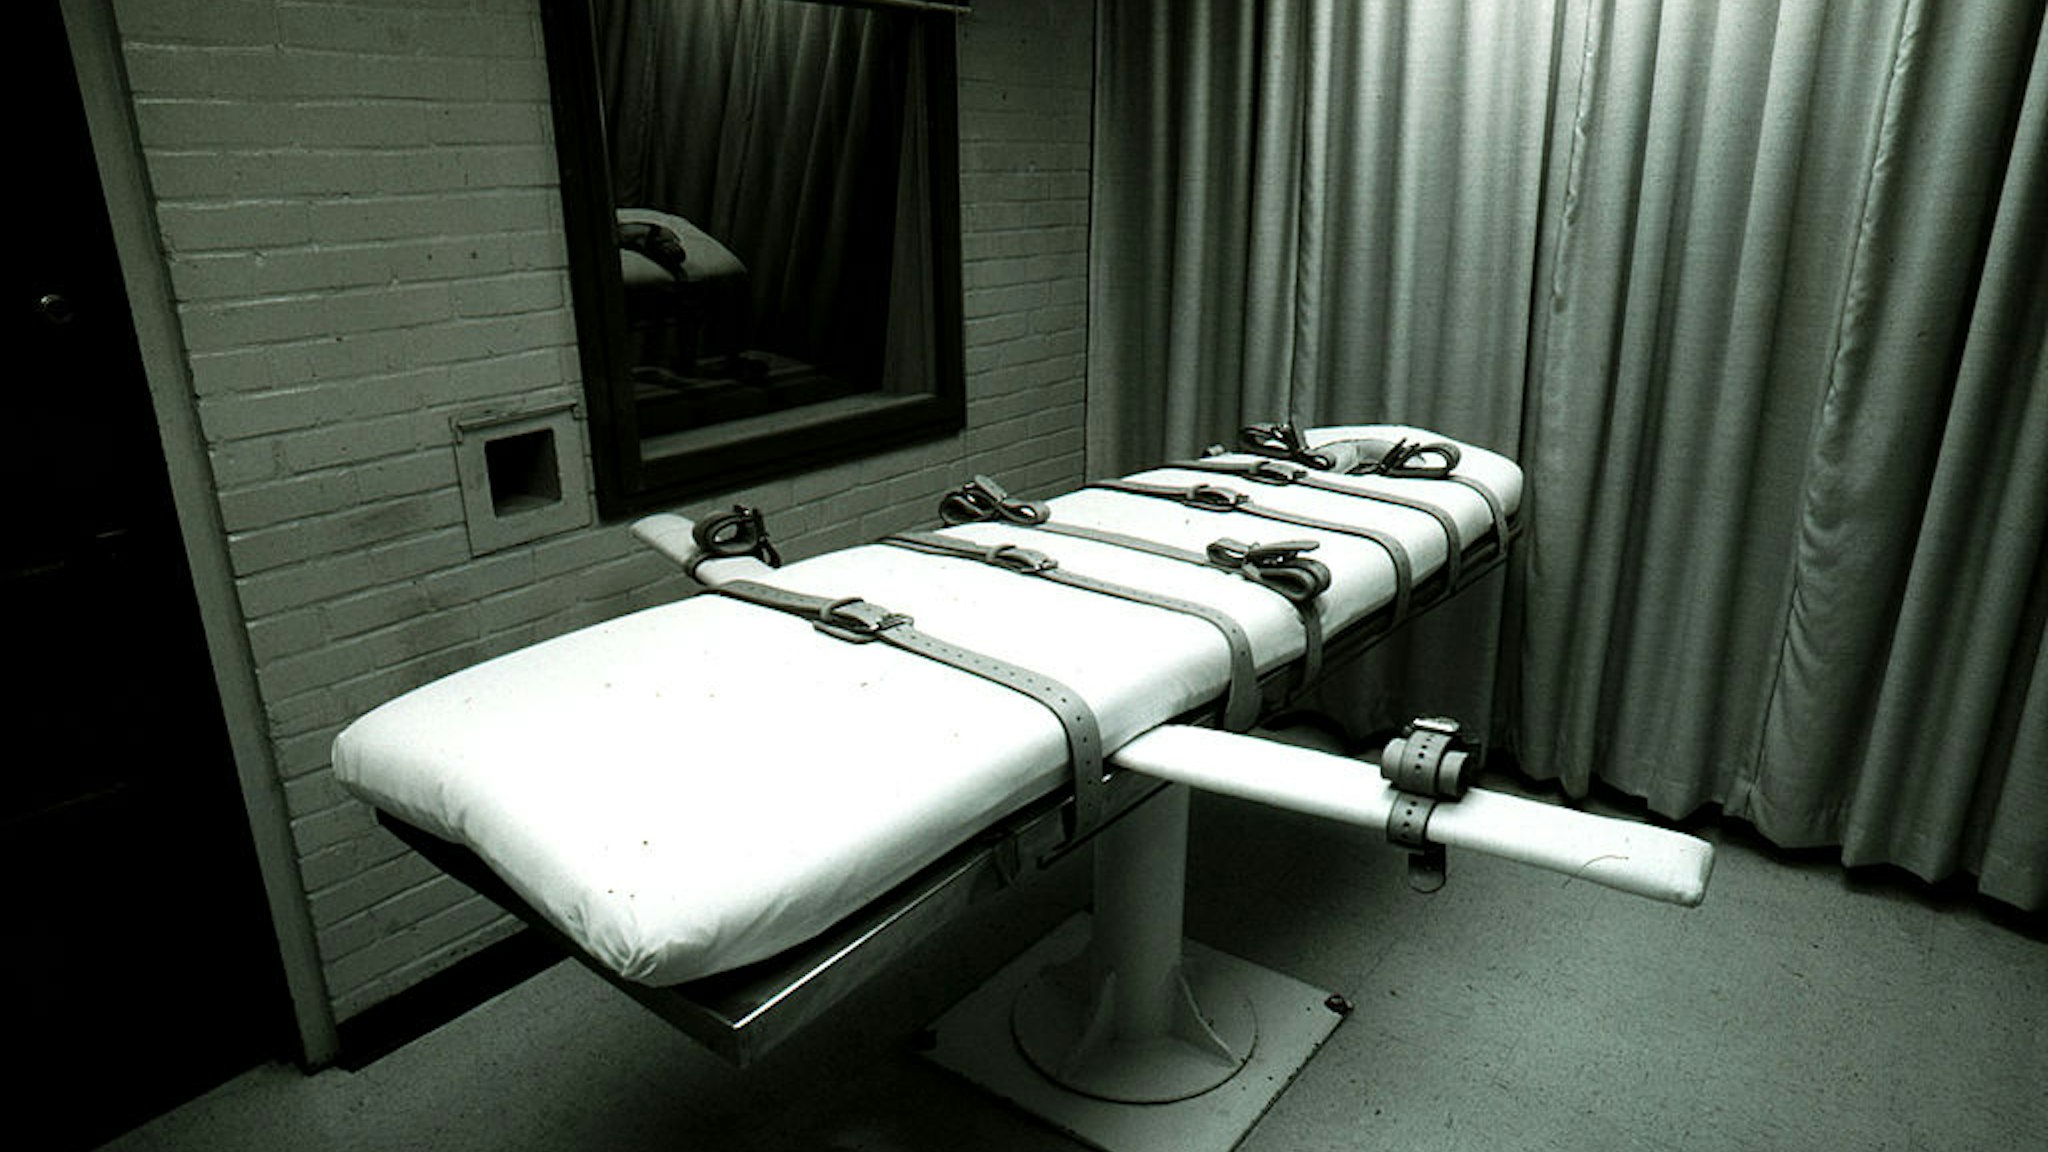 383356 17: The execution bed sits empty on Death Row April 25, 1997 at Texas Death Row in Huntsville, Texas. About 450 prisoners are on the Row. Texas has the most executions in the US each year. The inmates are executed by lethal injection. (Photo by Per-Anders Pettersson/Liaison)